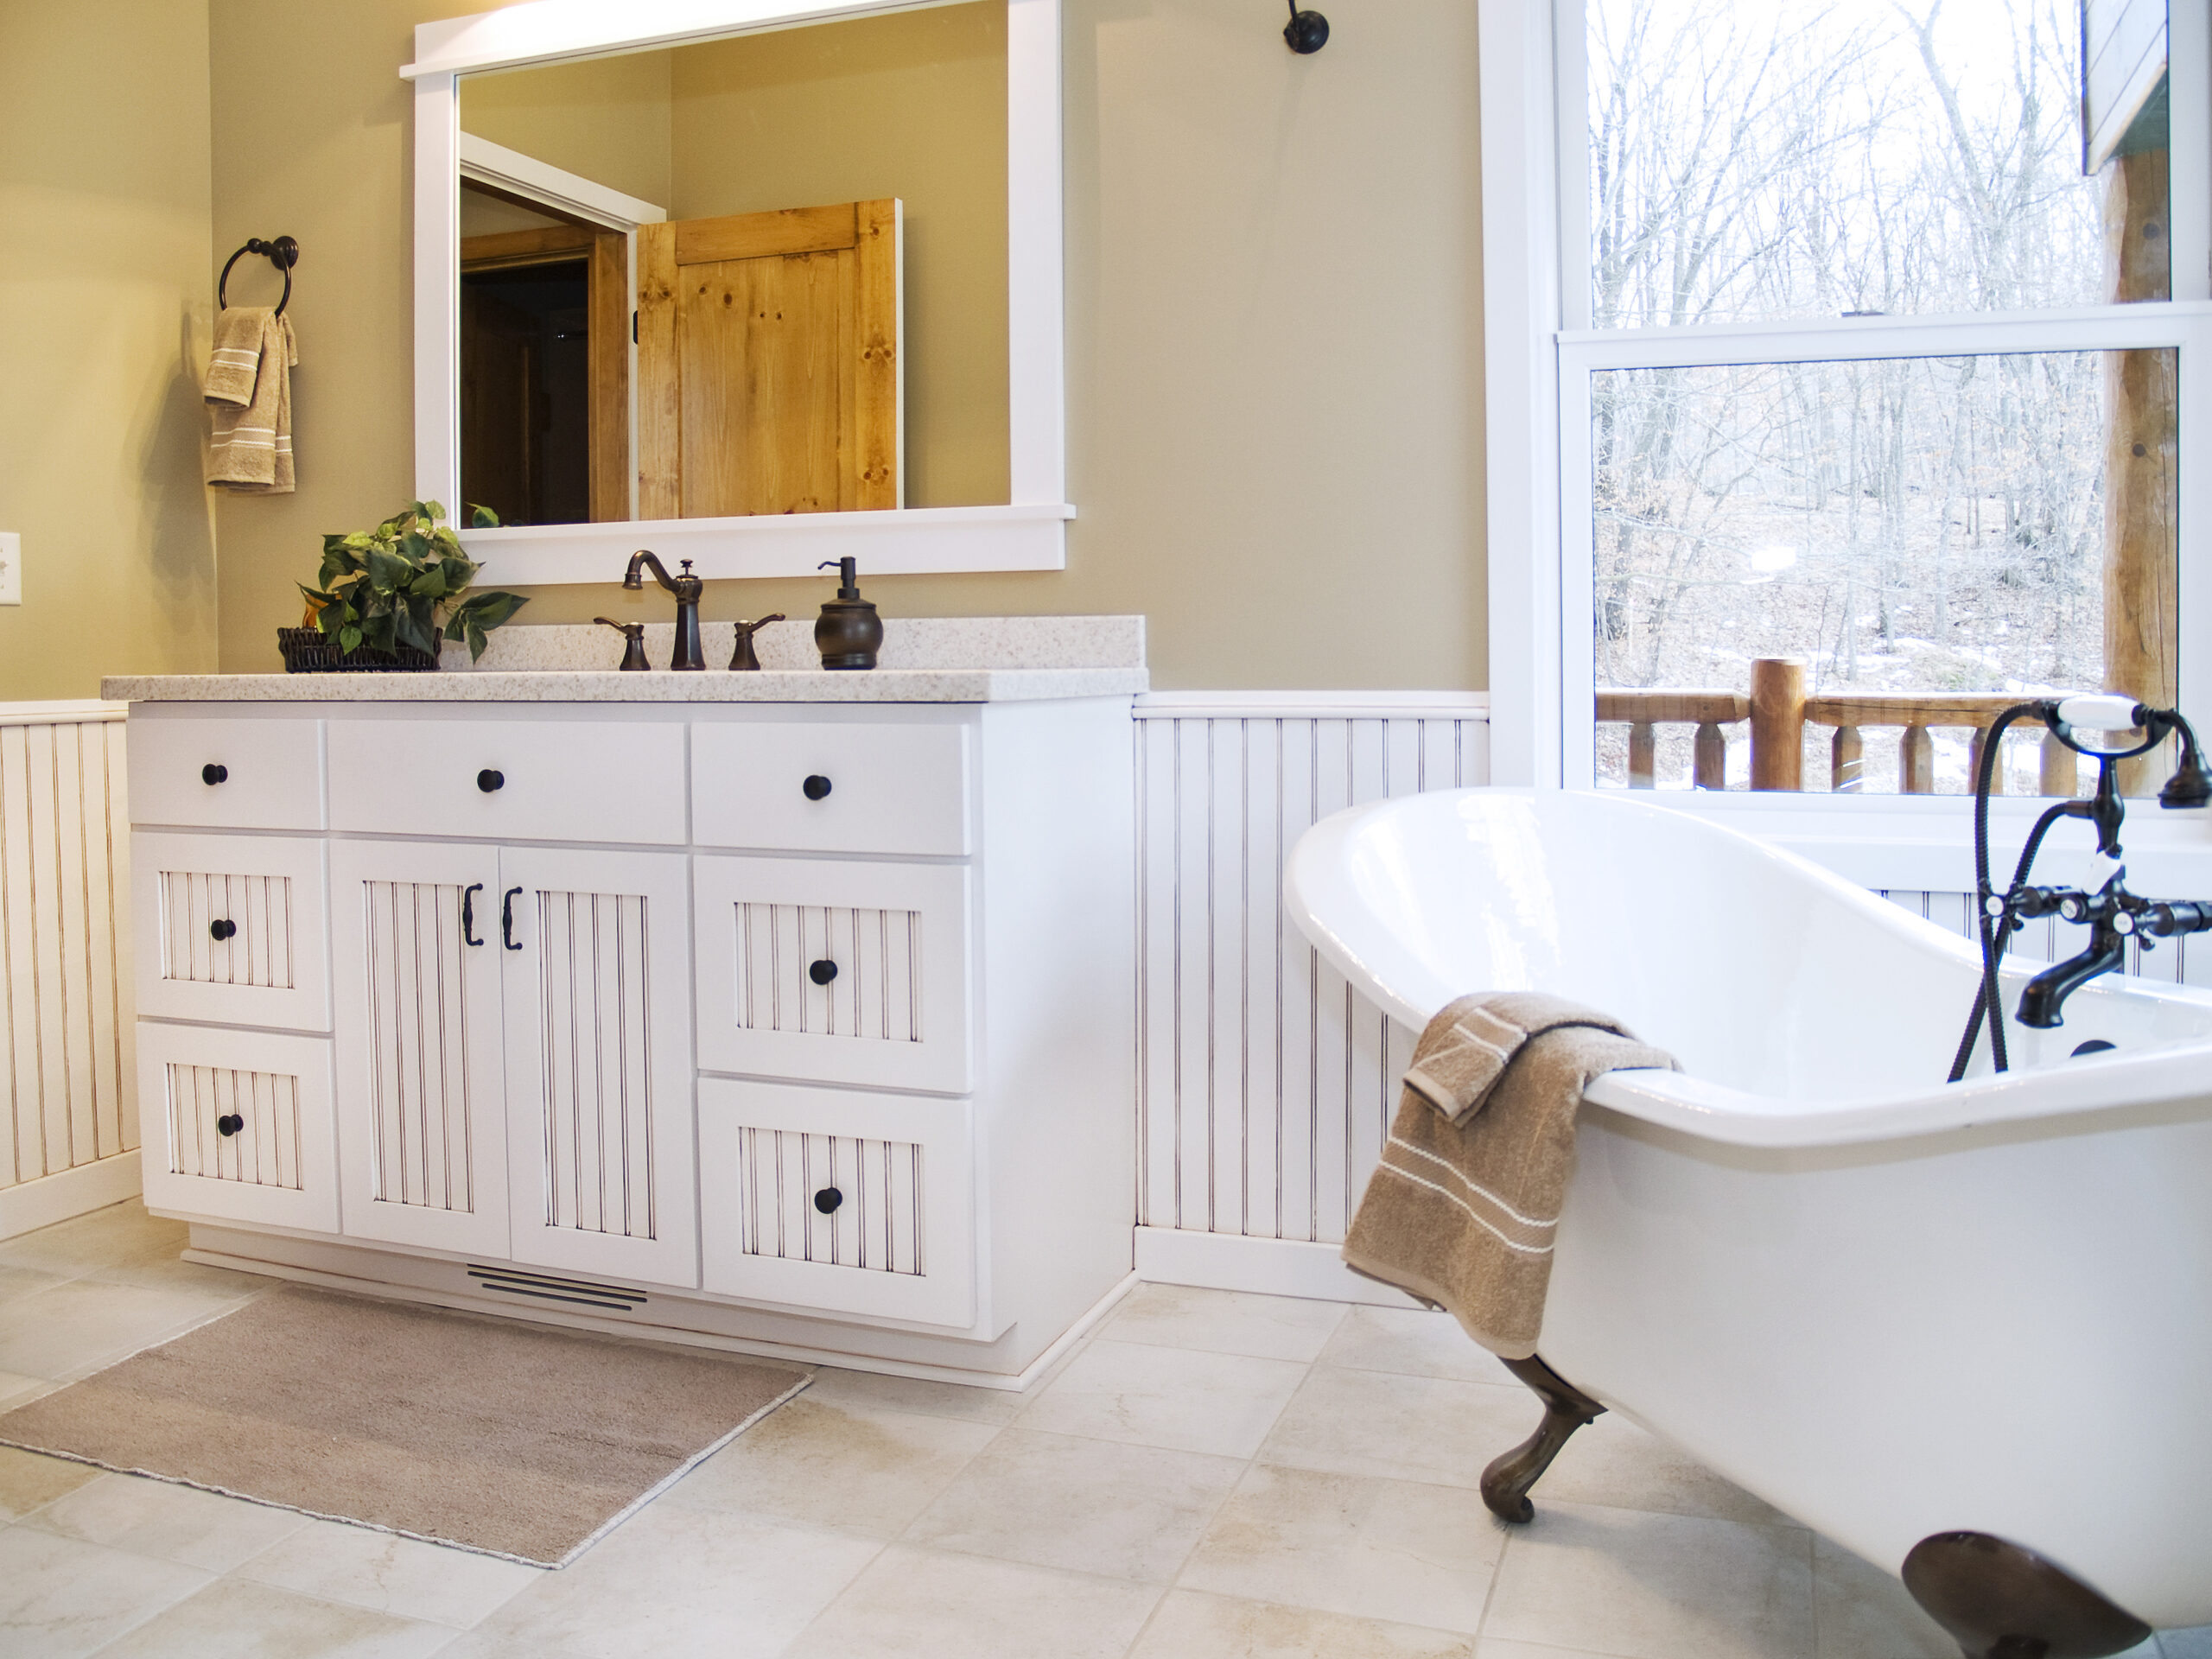 Twin Cities home remodeling and design, renovate a bathroom